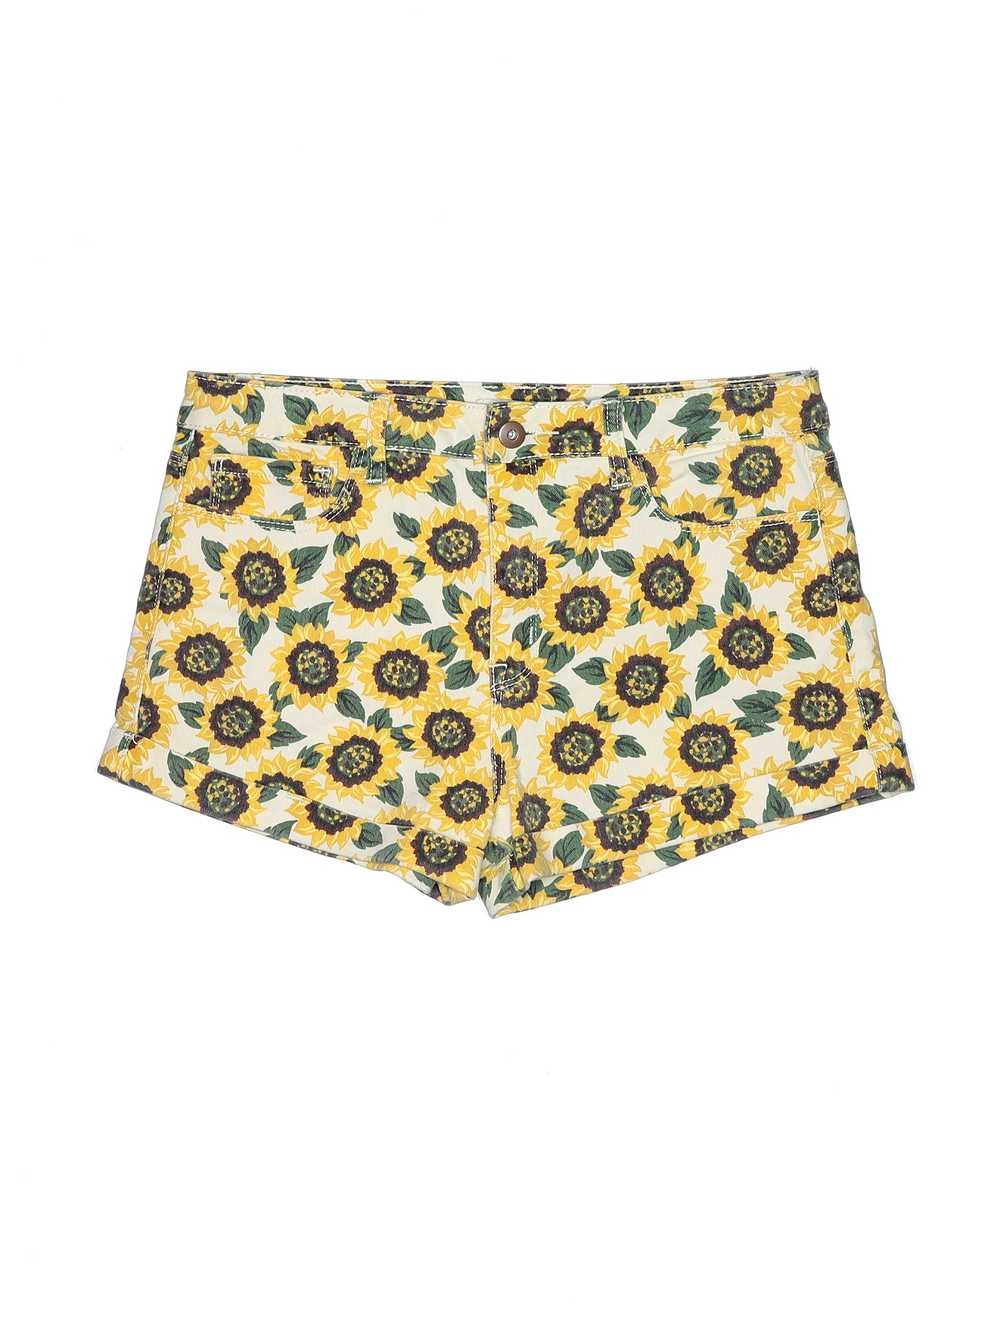 Forever 21 Women Yellow Shorts 29W - image 1